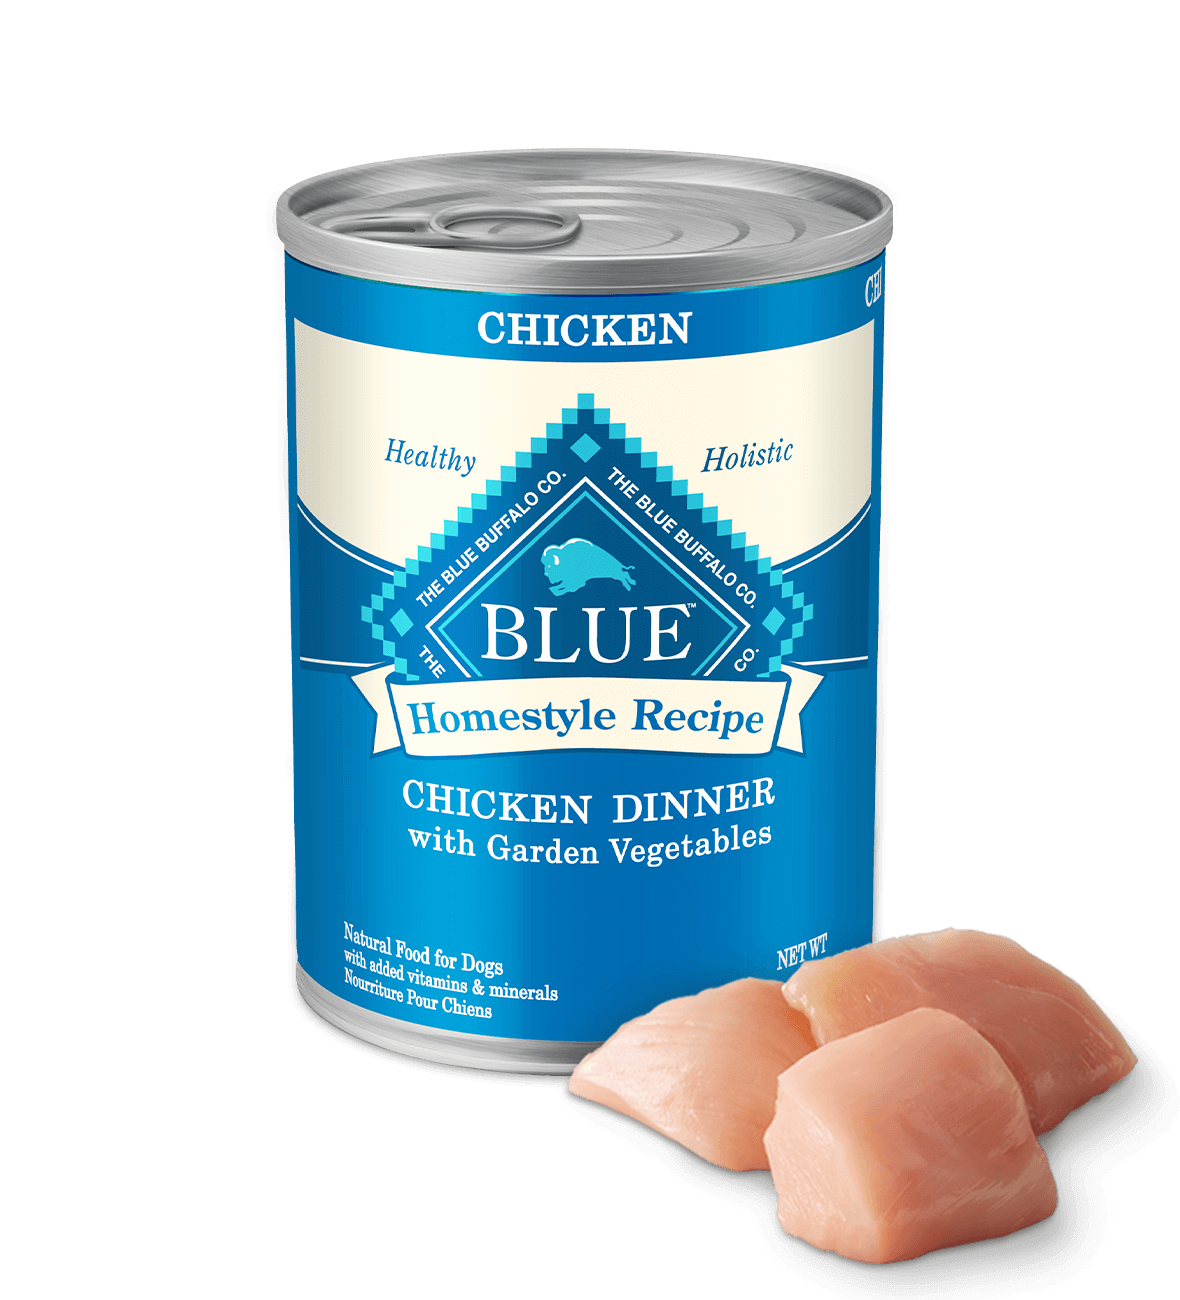 Blue Buffalo Homestyle Recipes Dog Food Review (Wet)